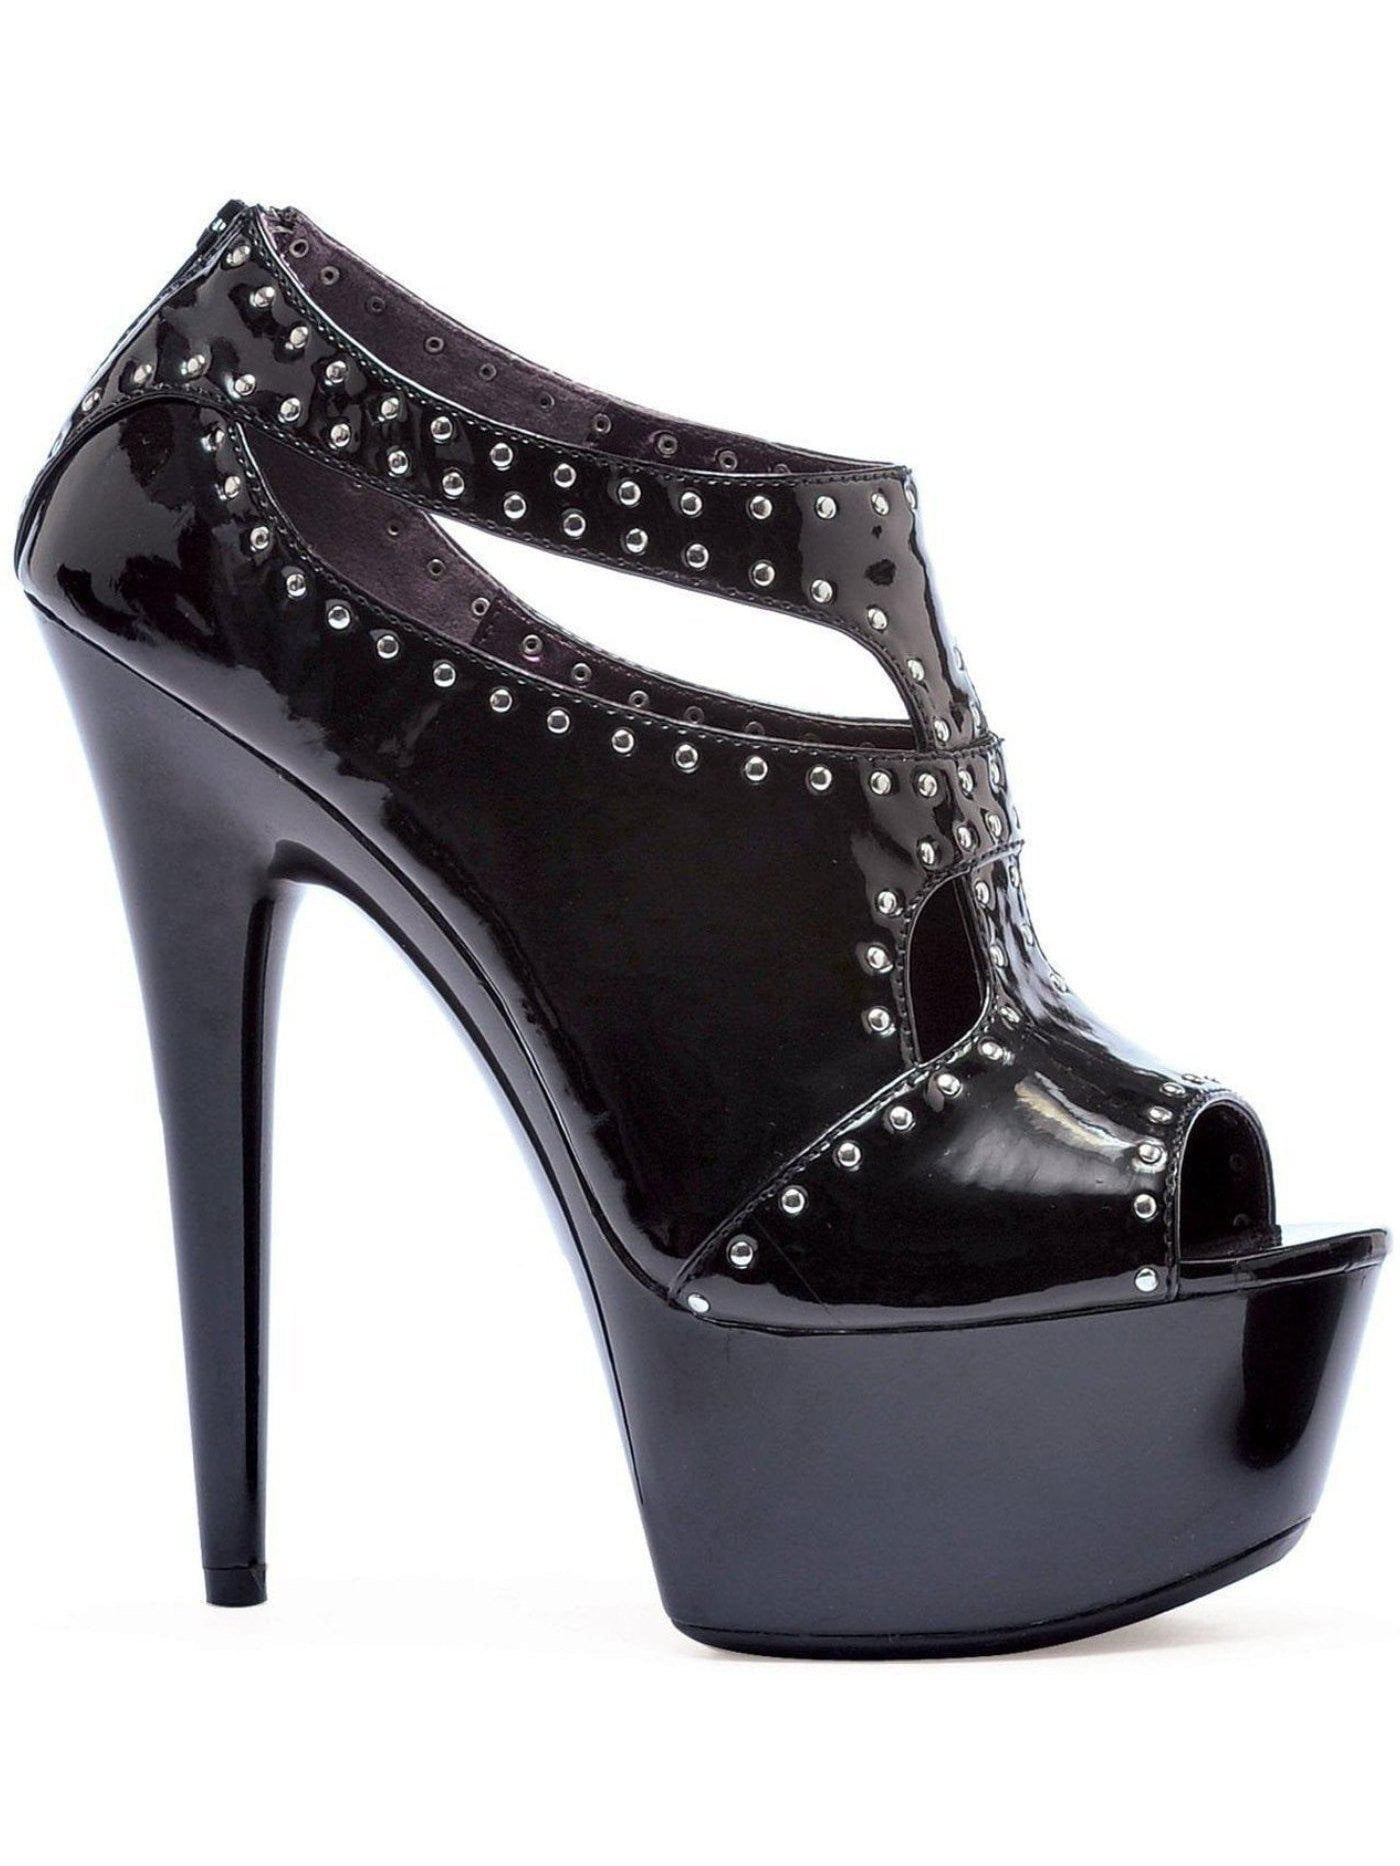 black shoes with silver studs